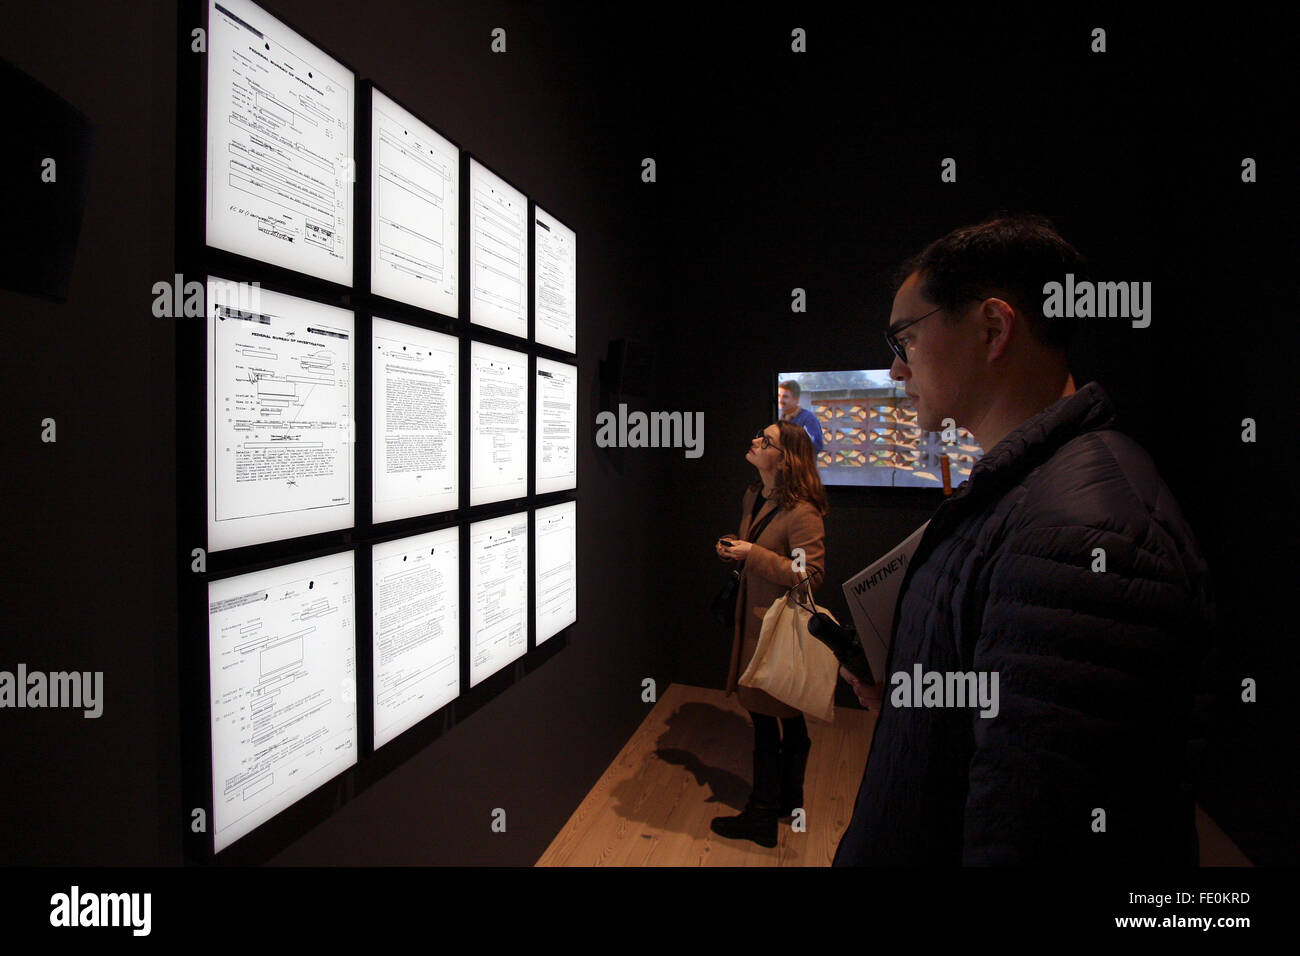 New York City, NY, USA. 3rd February, 2016. A series of panels representing FBI surveillance files on the artist Laura Poitras on display at Astro Noise, her first solo exhibition at the Whitney Museum of American Art in New York City as it was previewed to the press on February 3, 2016.   Poitras, a filmmaker, artist and journalist best known for helping to break the Edward Snowden story Drone Program, Guantanamo Bay Prison, occupation and torture. Credit:  Adam Stoltman/Alamy Live News Stock Photo